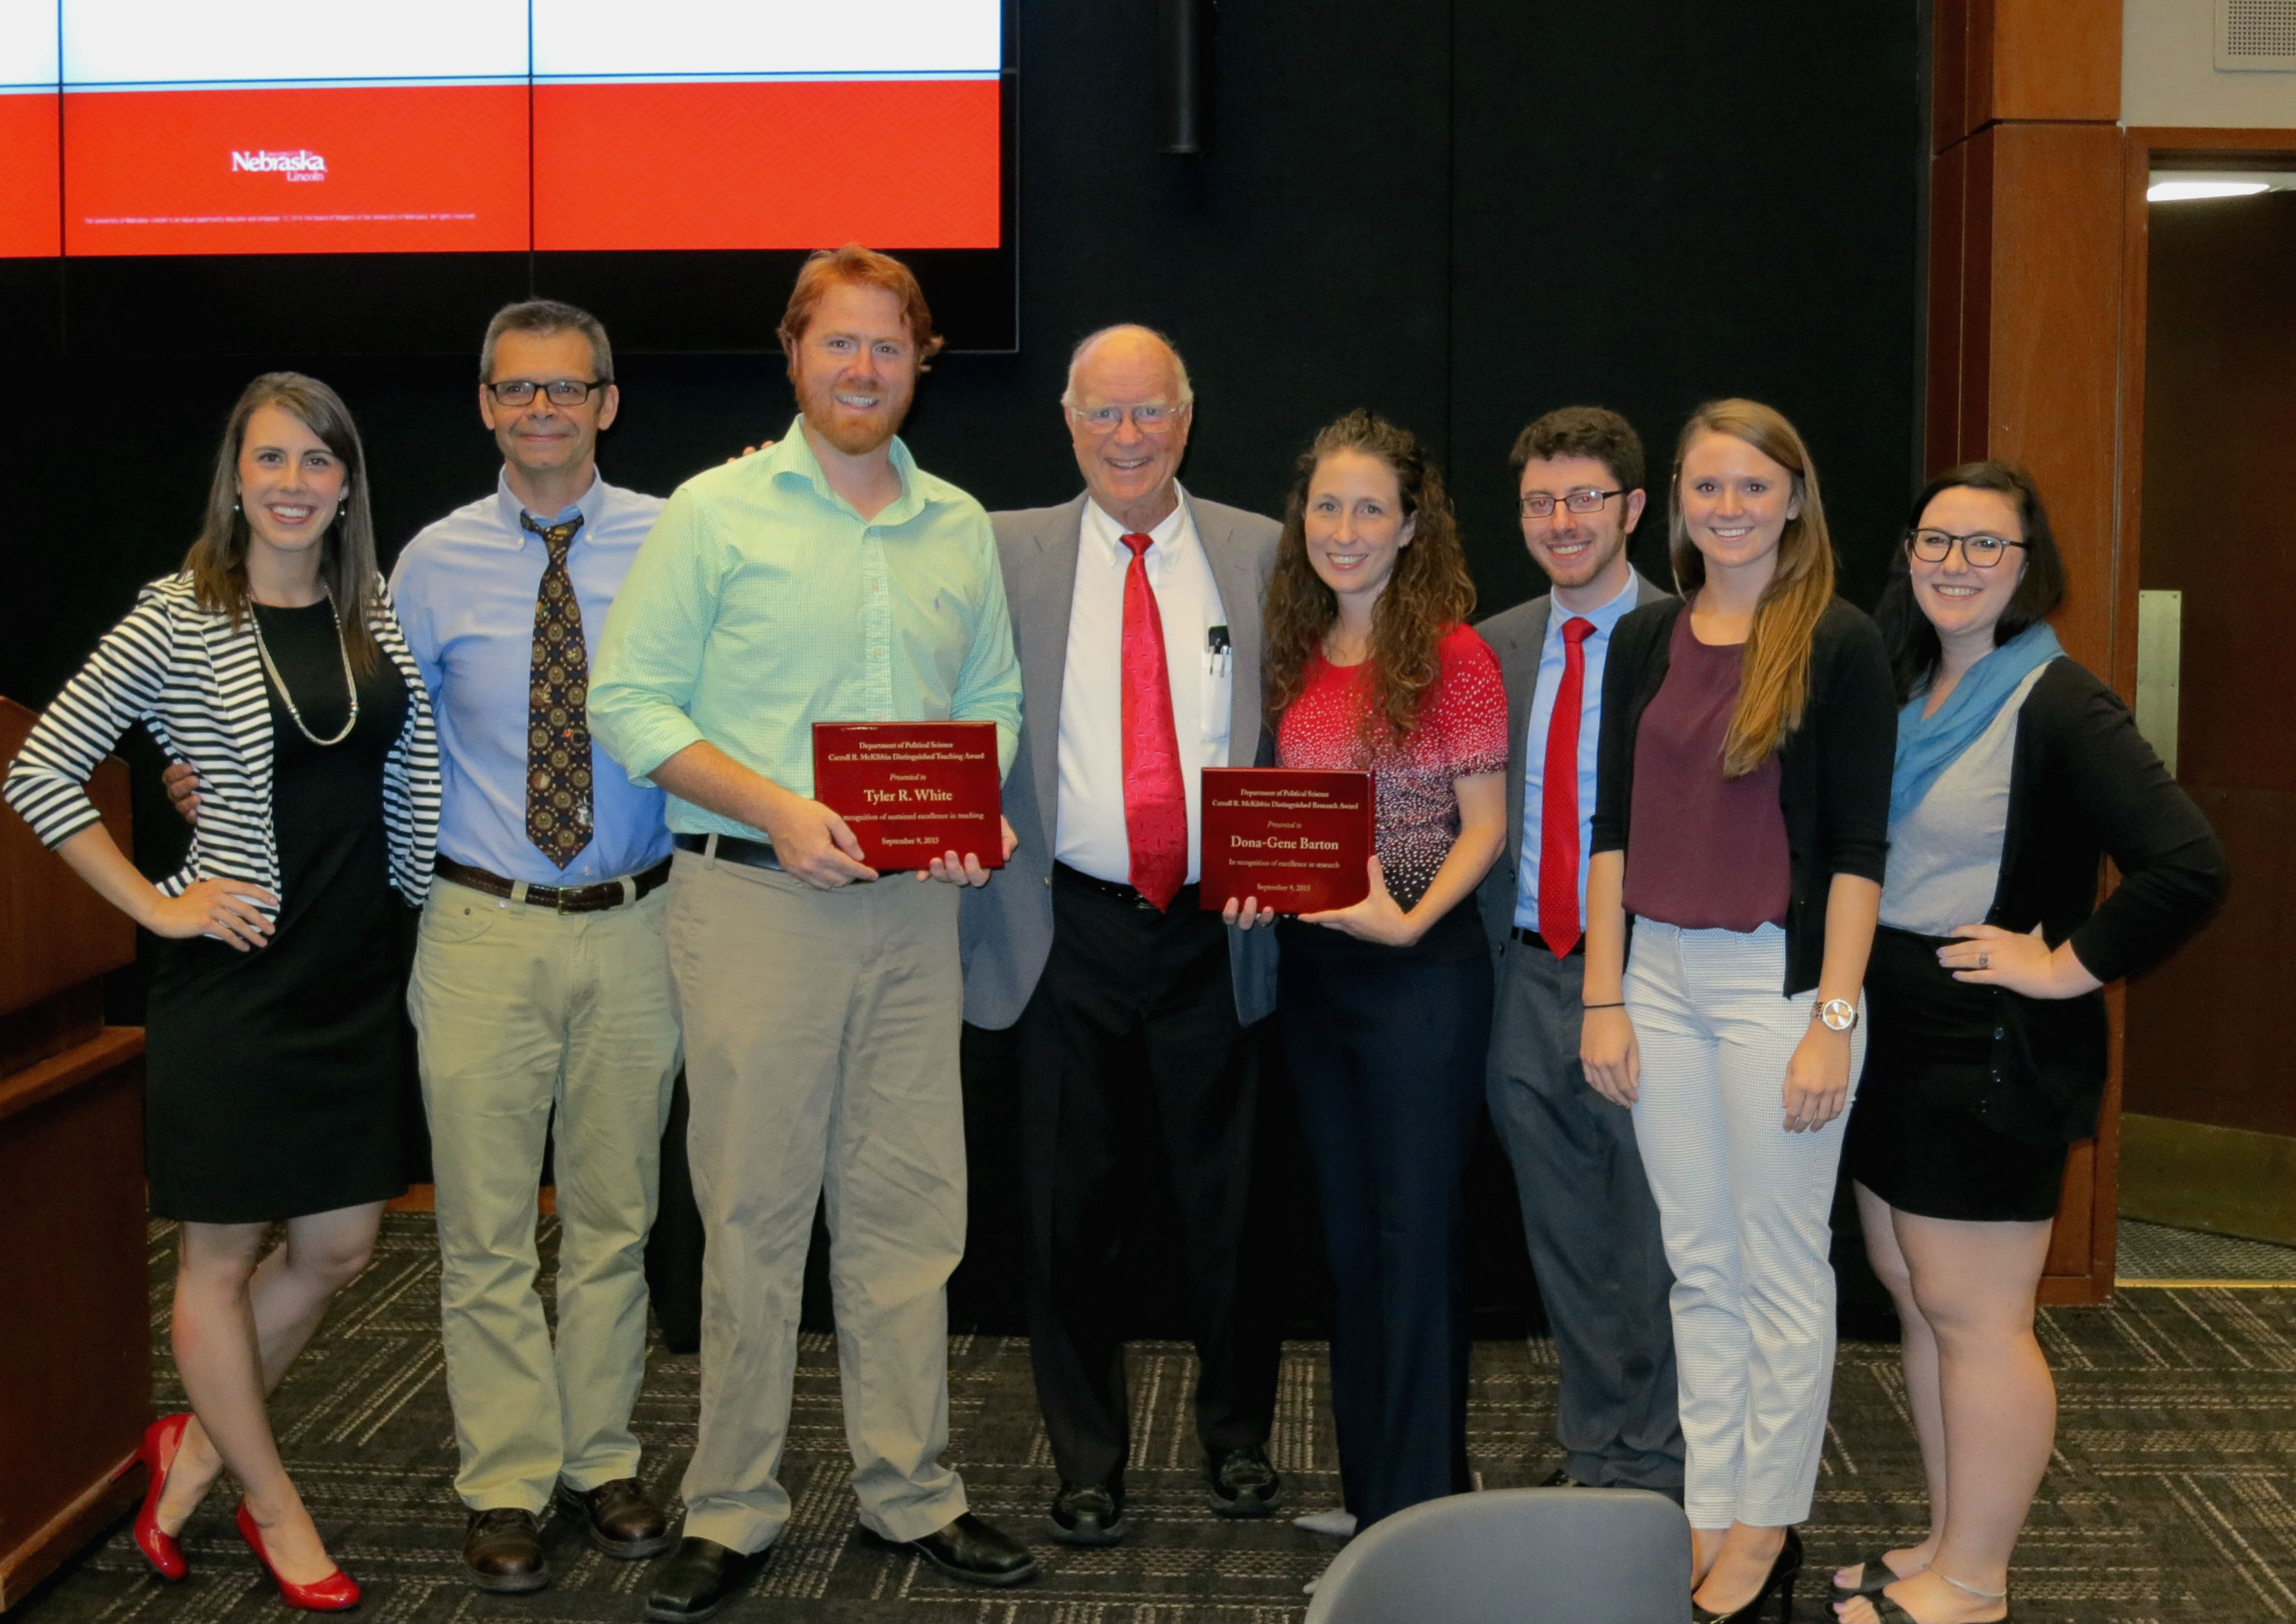 Second Annual Department of Political Science Banquet Honors Distinguished Teaching and Research Award Winners